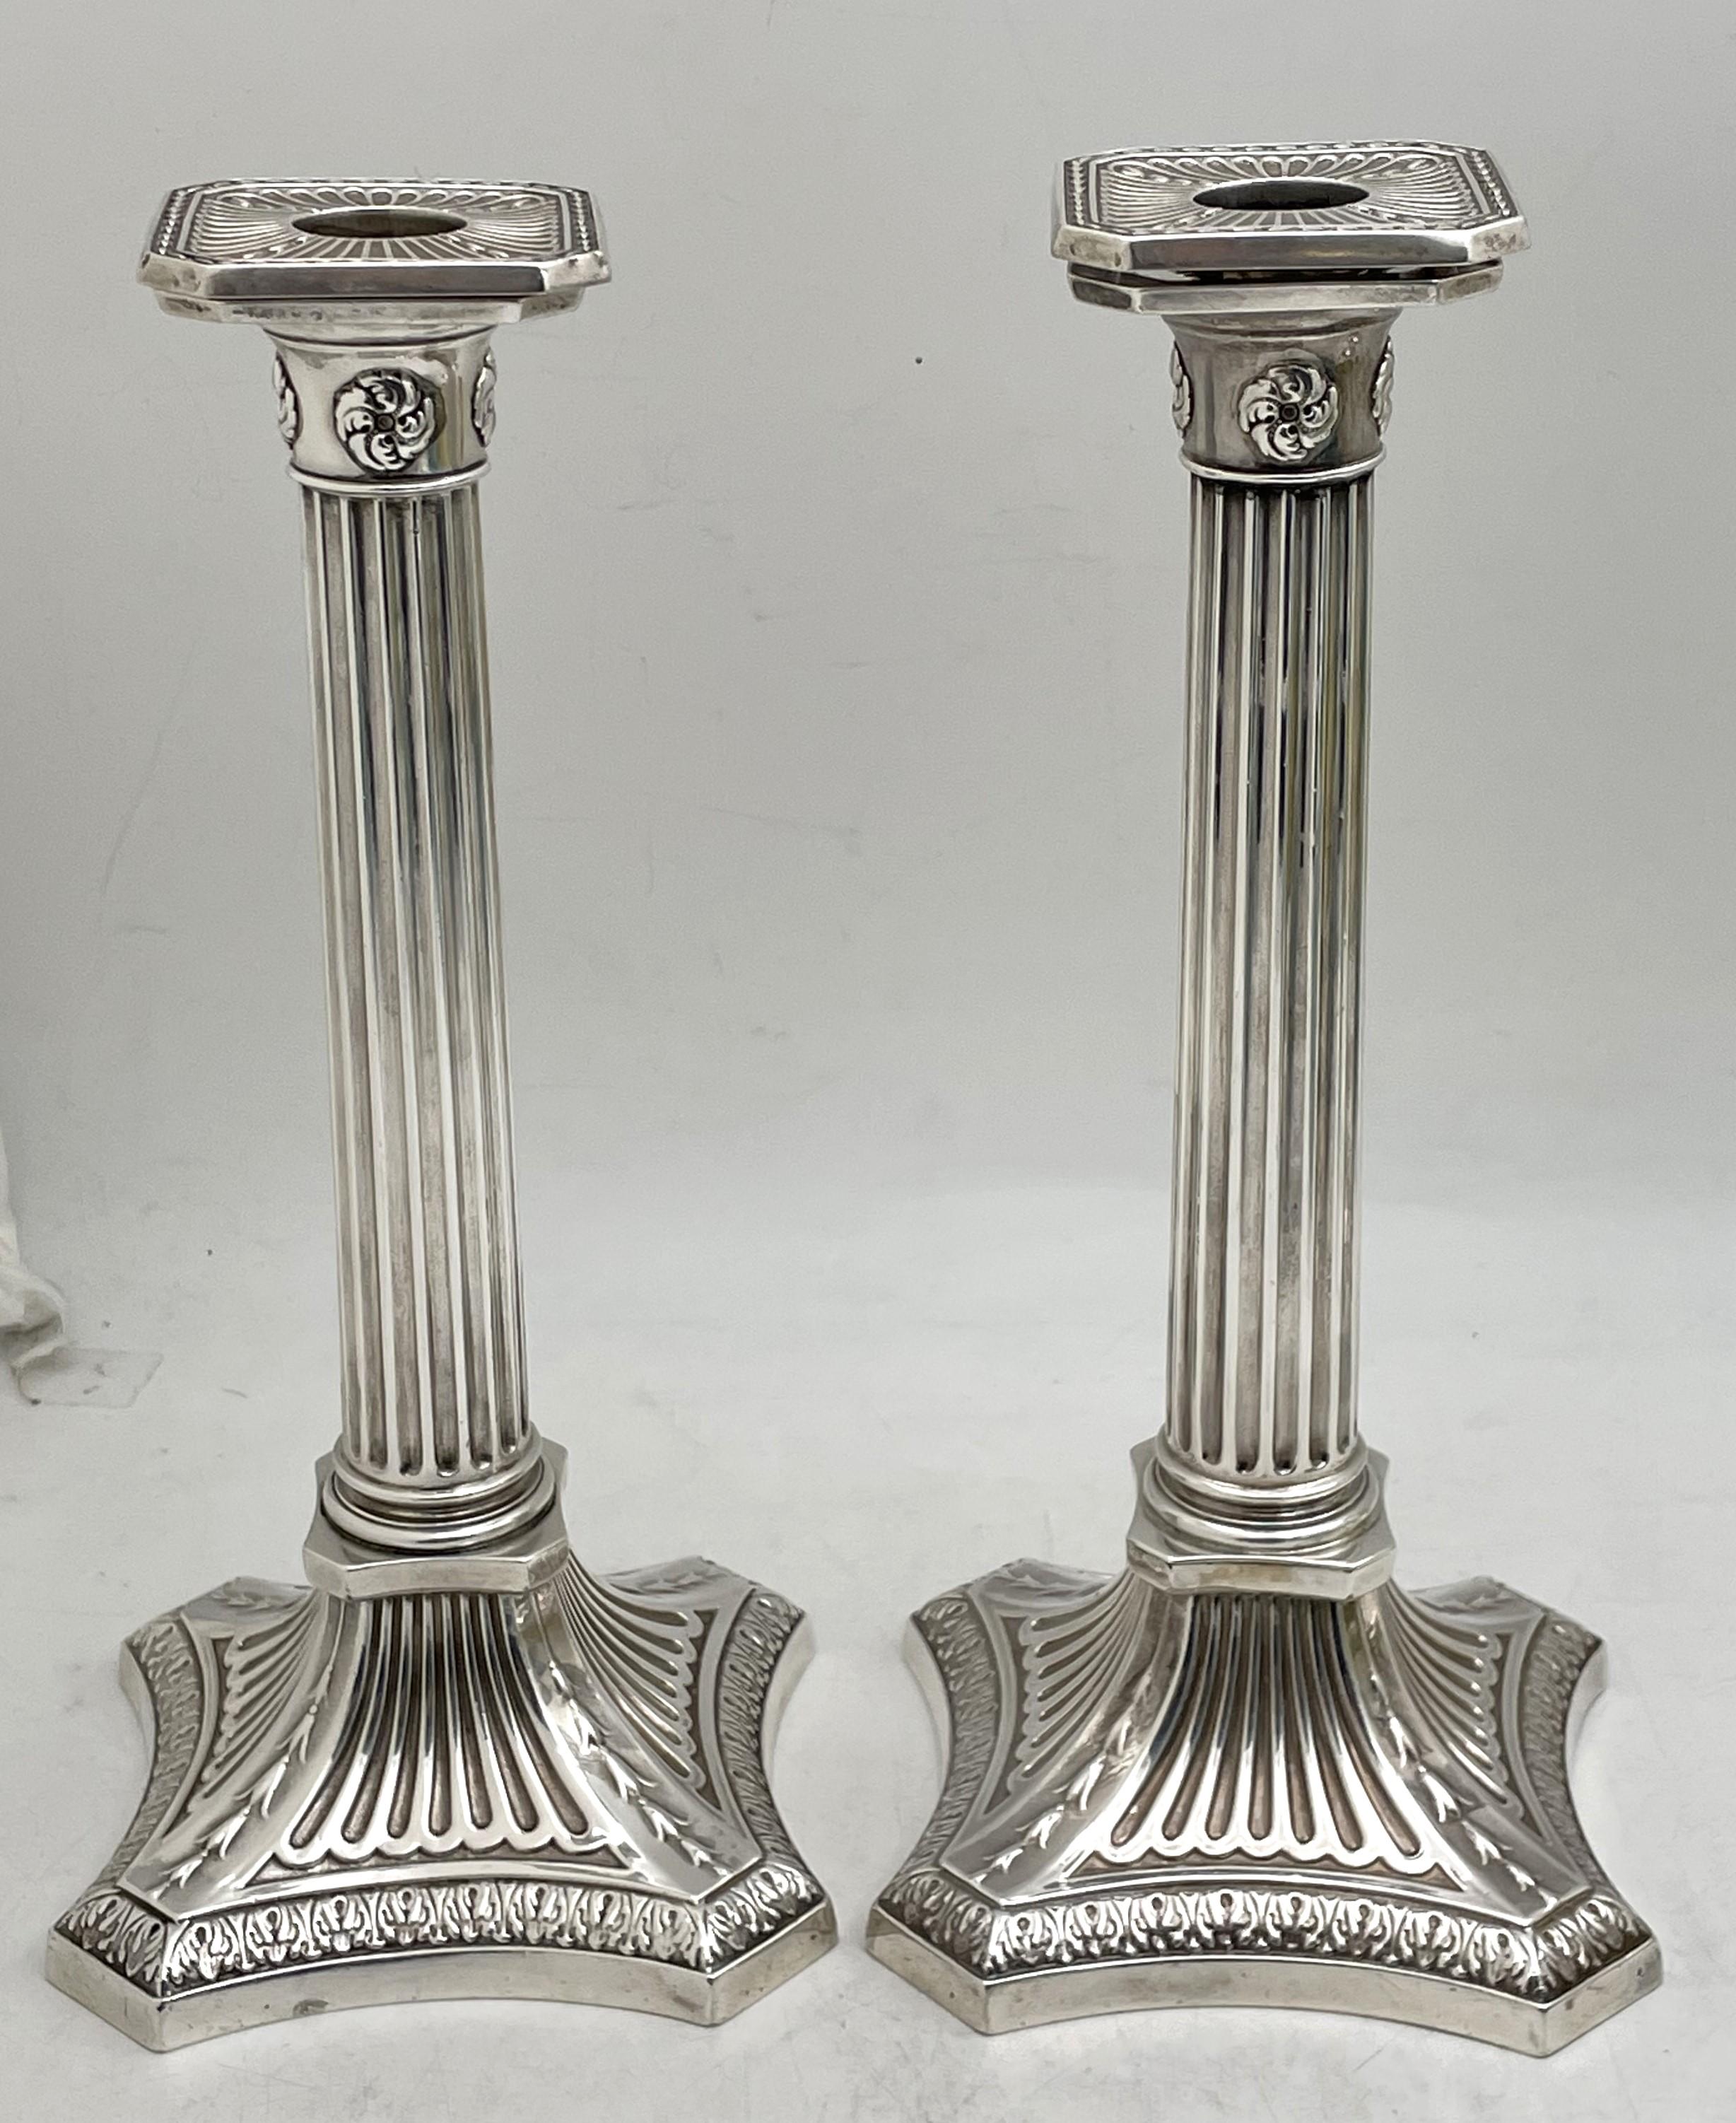 Gorham pair of sterling silver candlesticks from 1894, designed as Corinthian columns, with an elegant design and with removable bobeches. They measure 10 1/4'' in height by 4 1/2'' in depth at the base, are weighted, and bear hallmarks as shown.